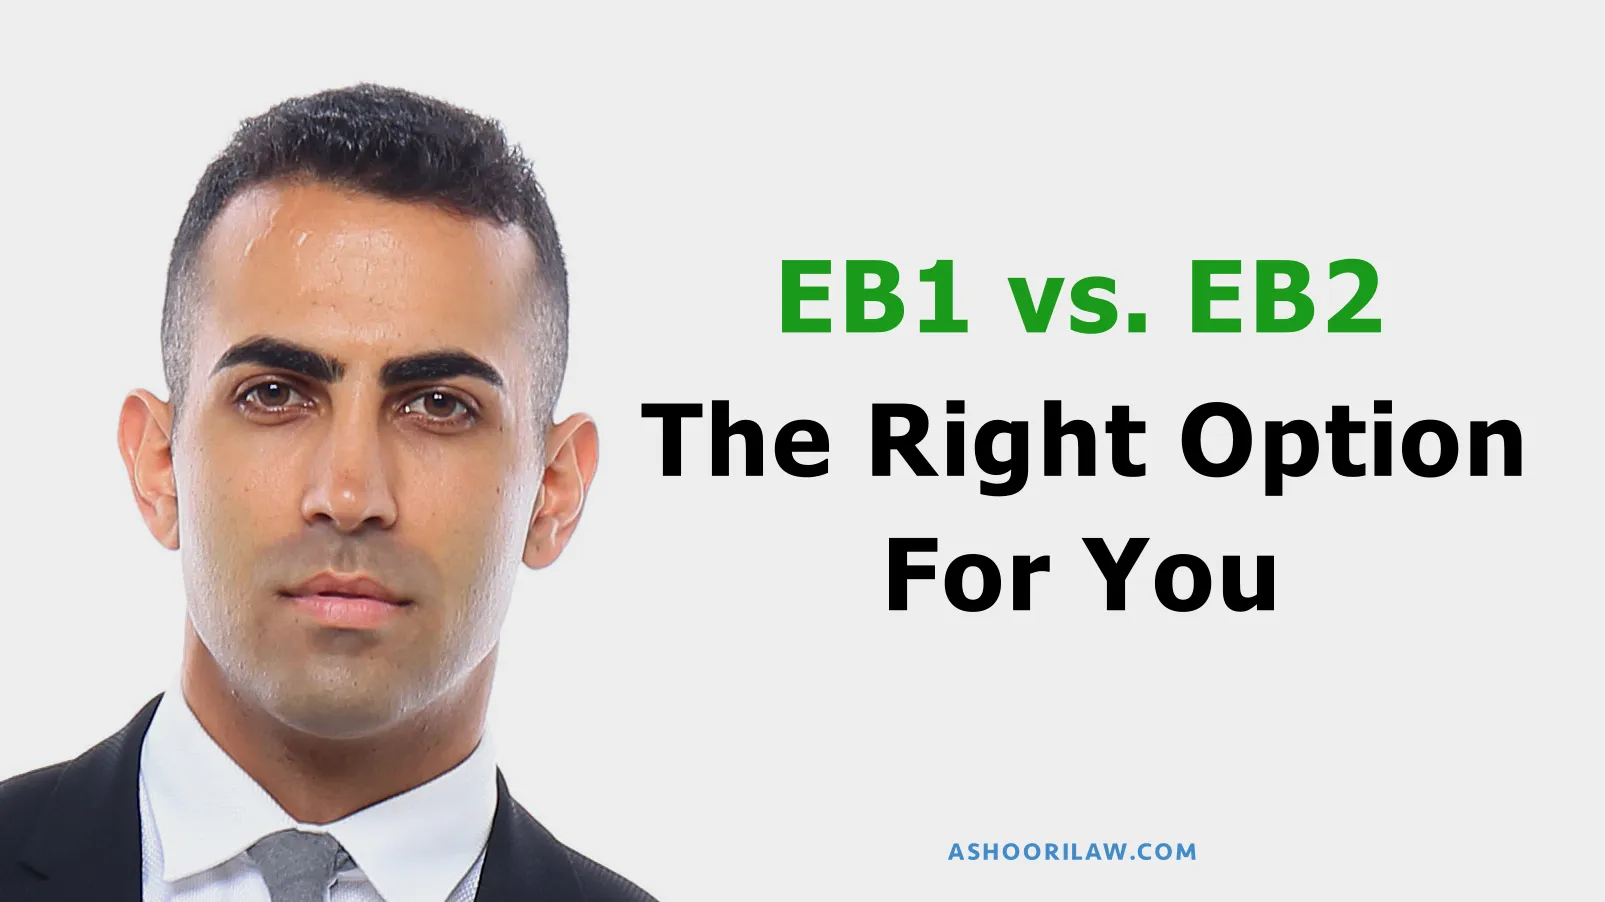 EB1 vs EB2: The Right Option For You